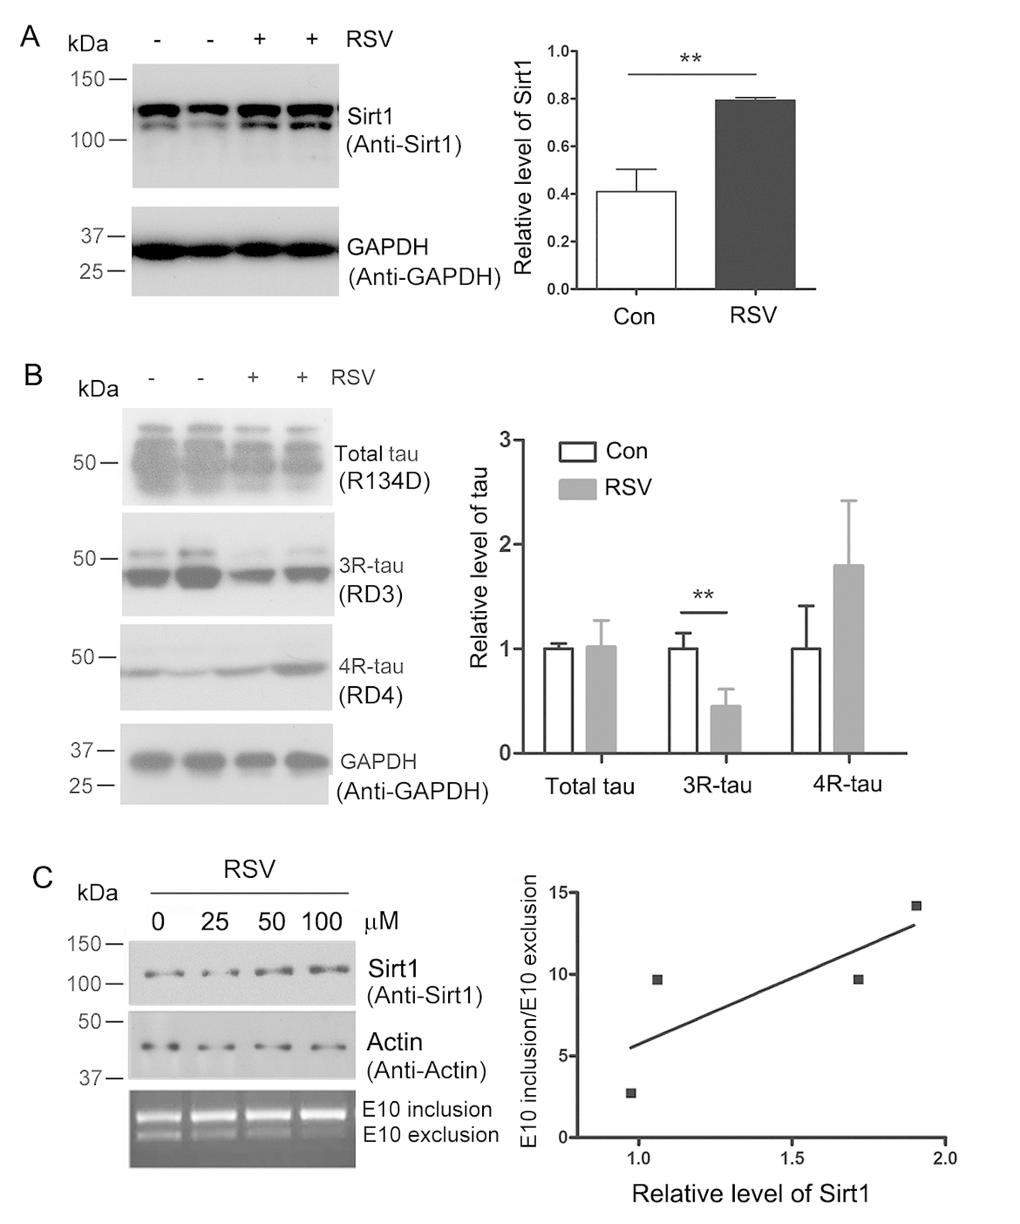 Resveratrol enhances Sirt1 expression and suppresses 4R-tau expression. (A, B) 5-month old Htau mice were treated with resveratrol for 7 months. The levels of 3R-tau, 4R-tau and total tau in the brains were analyzed by western blot developed with anti-Sirt1 (A) and anti-3R-tau and anti-4R-tau (B). The data are presented as mean ± S.D. (n=3-5) and analyzed by student t-test. **, pC) pCI/SI9-SI10 was transfected into HEK-293T cells and then the cells were treated with 0, 25, 50 and 100 μM of resveratrol for 48 h. Total RNA was extracted and alternative splicing of tau exon 10 was analyzed by RT-PCR. Ratio of exon 10 inclusion/exon 10 exclusion was plotted against the resveratrol concentration.